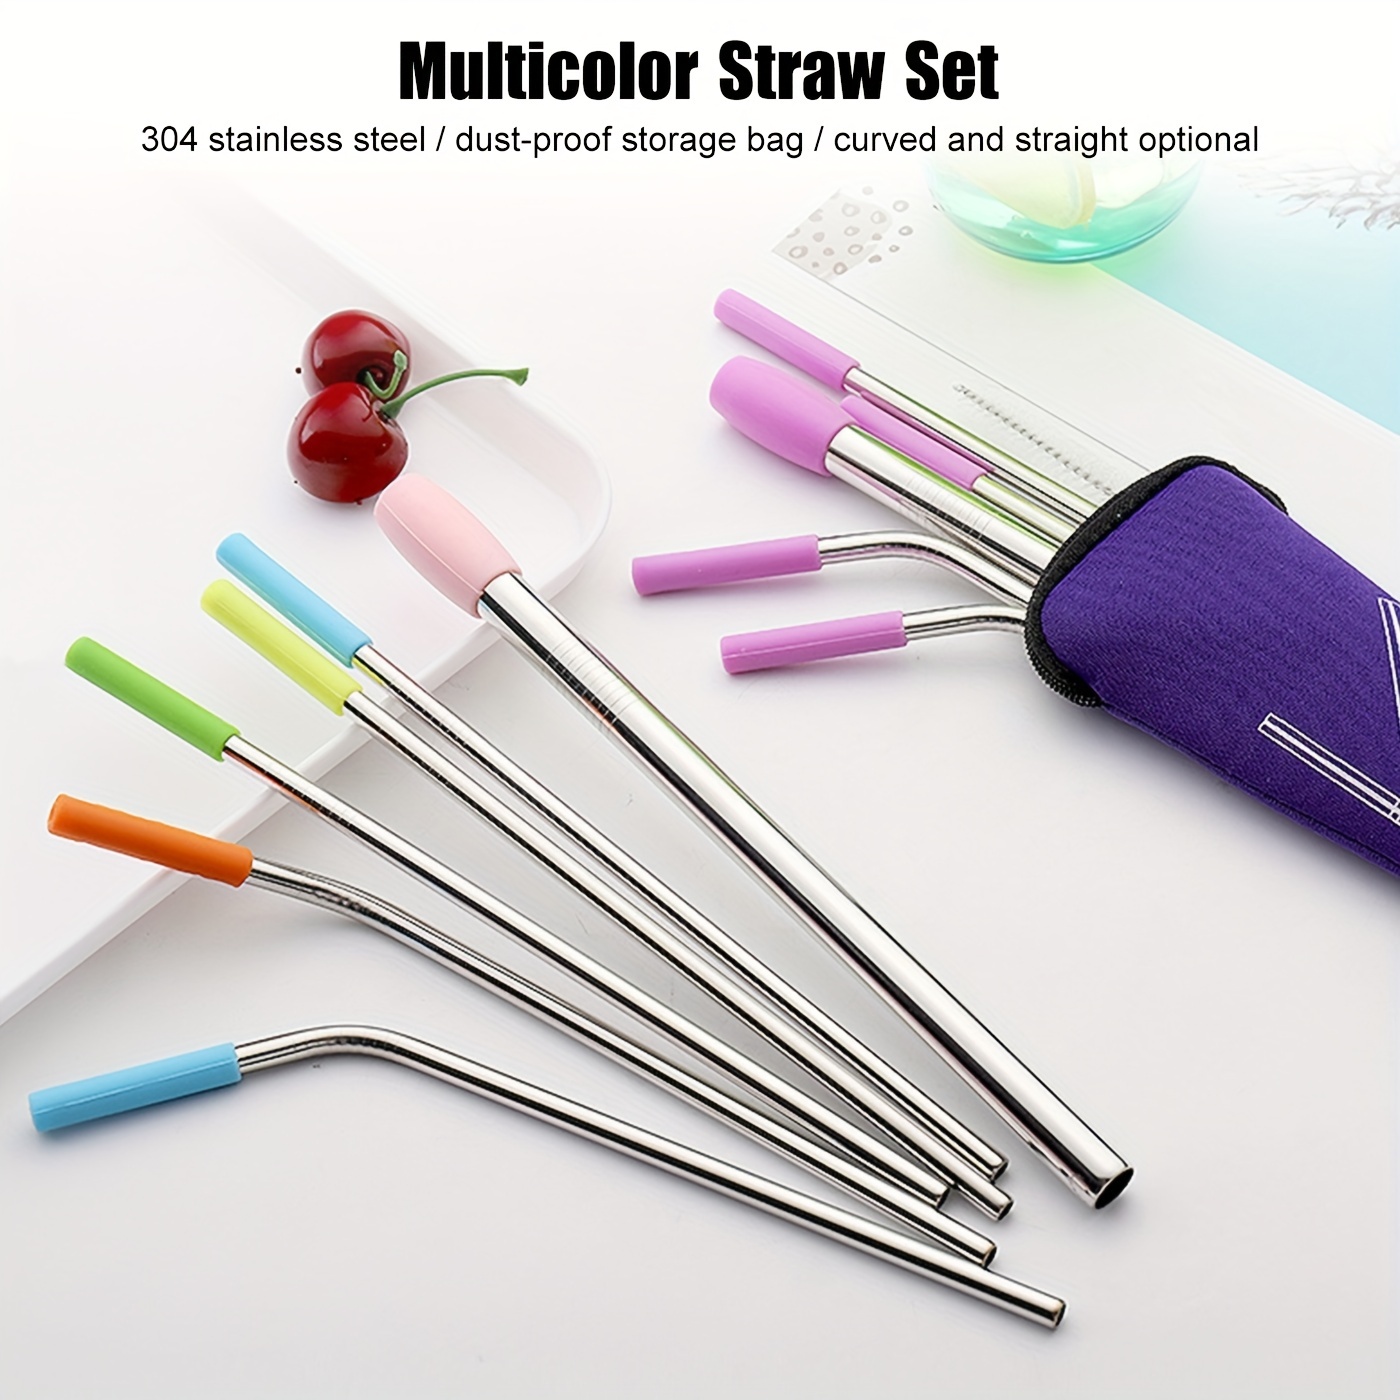 8 Piece Reusable Metal Straw Set, Reusable Straw Set With Accessories,  Rainbow Reusable Straws, Travel Straw Set, Straw Cleaner, Large Straw 